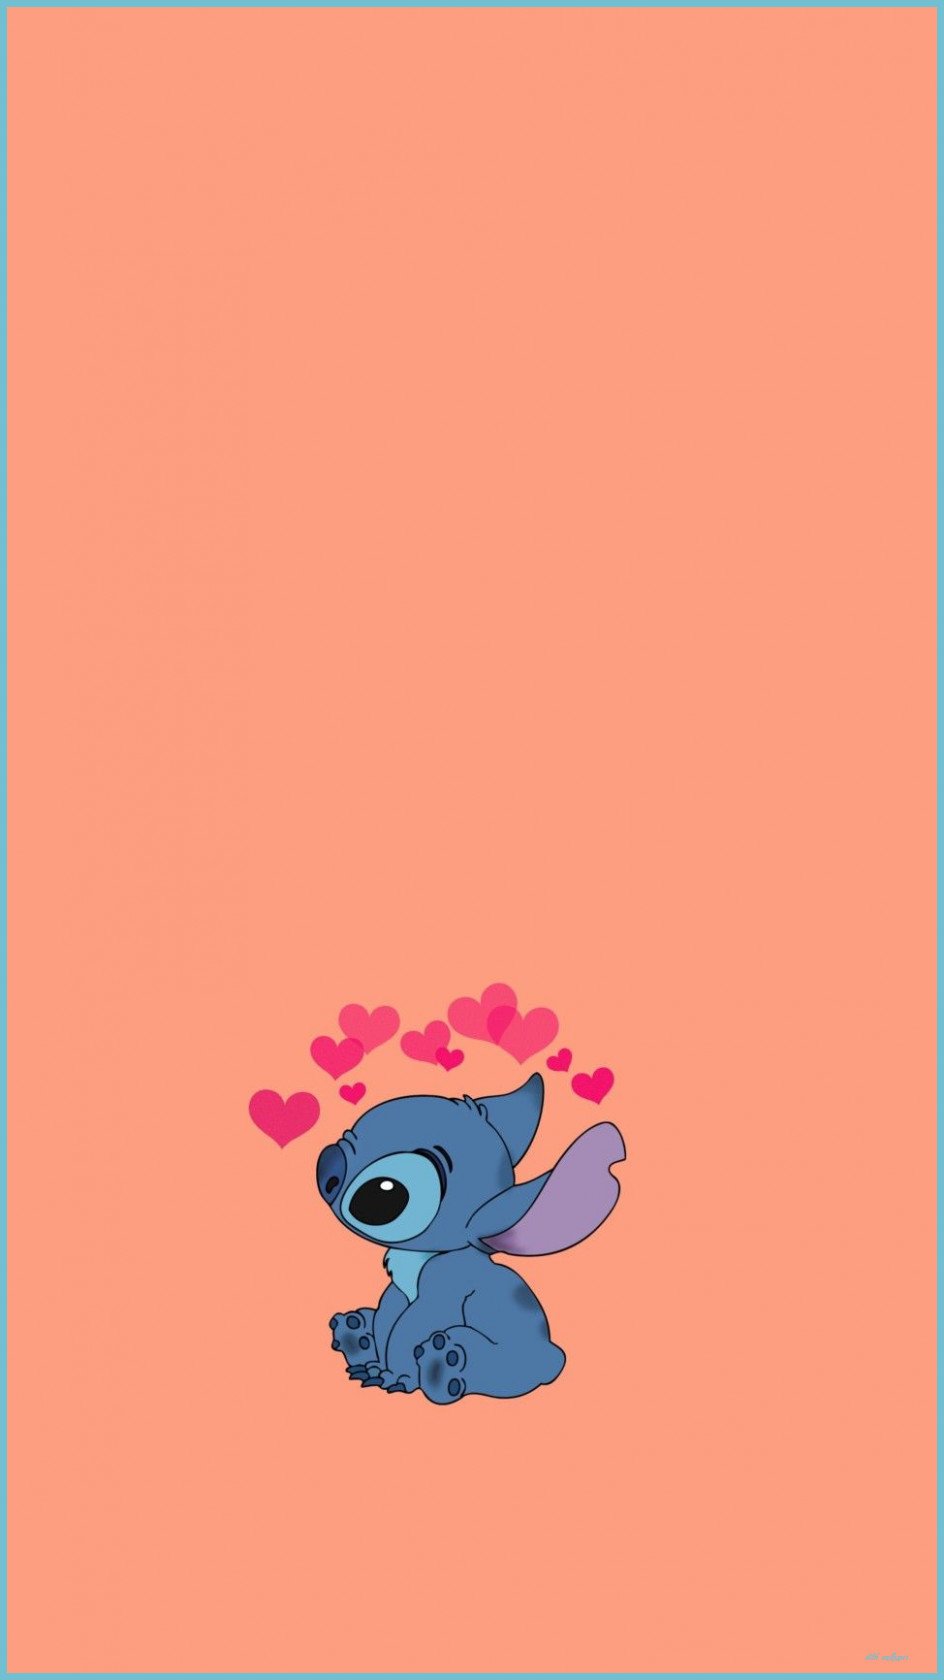 Download wallpapers Lilo Stitch How To Train Your Dragon Pikachu  Toothless Pokemon for desktop free Pictures for desktop free